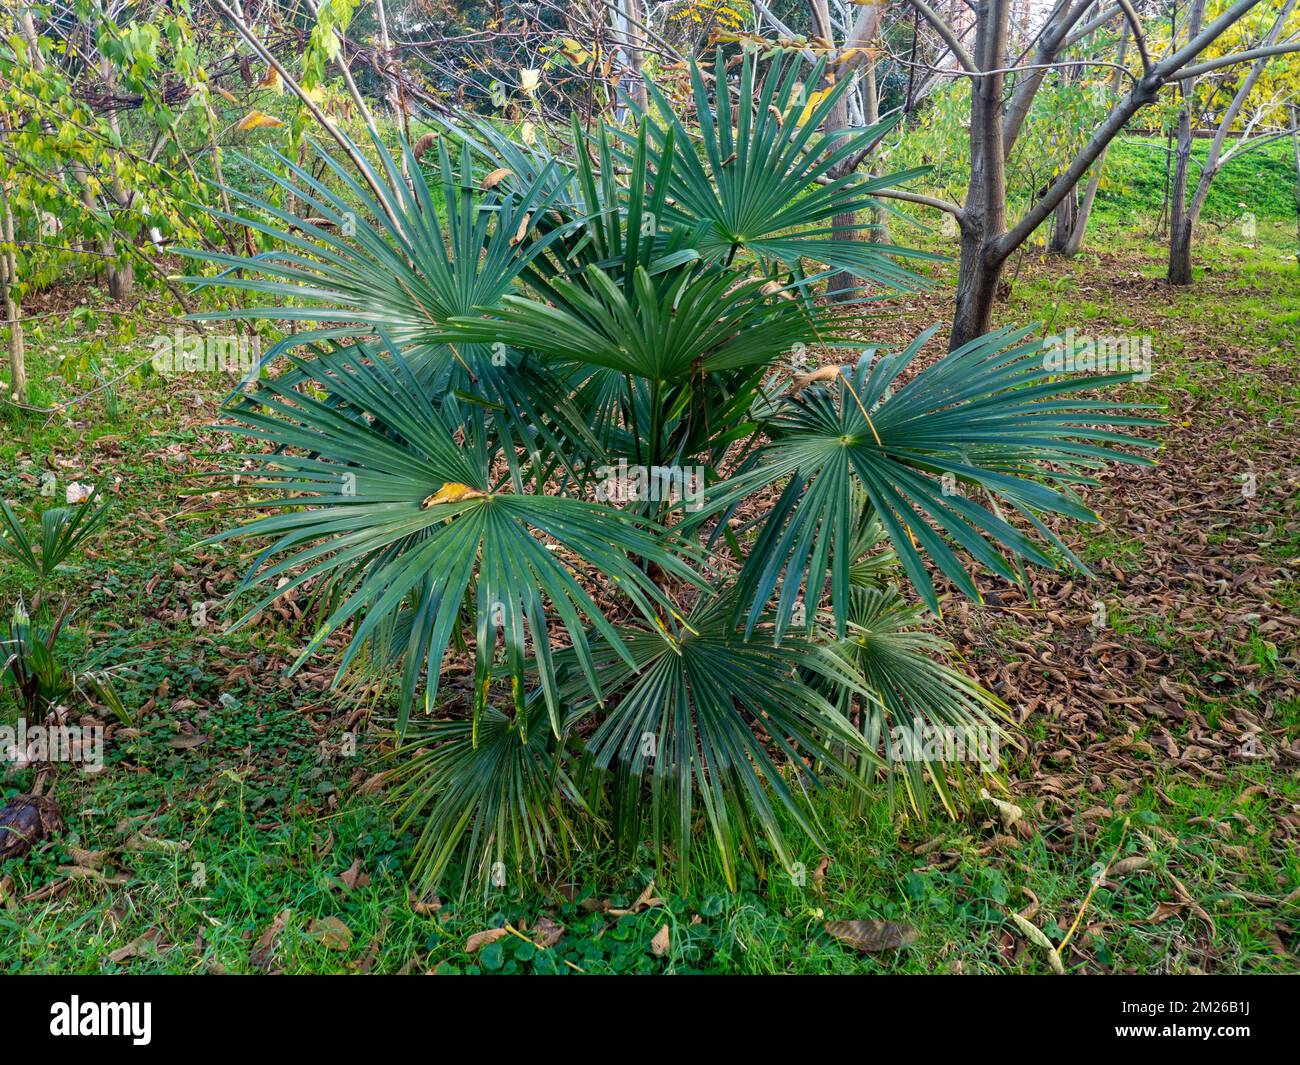 Fan palm. Palm tree in the yard. Southern nature. Kind of palm trees. Bush in the park. Stock Photo